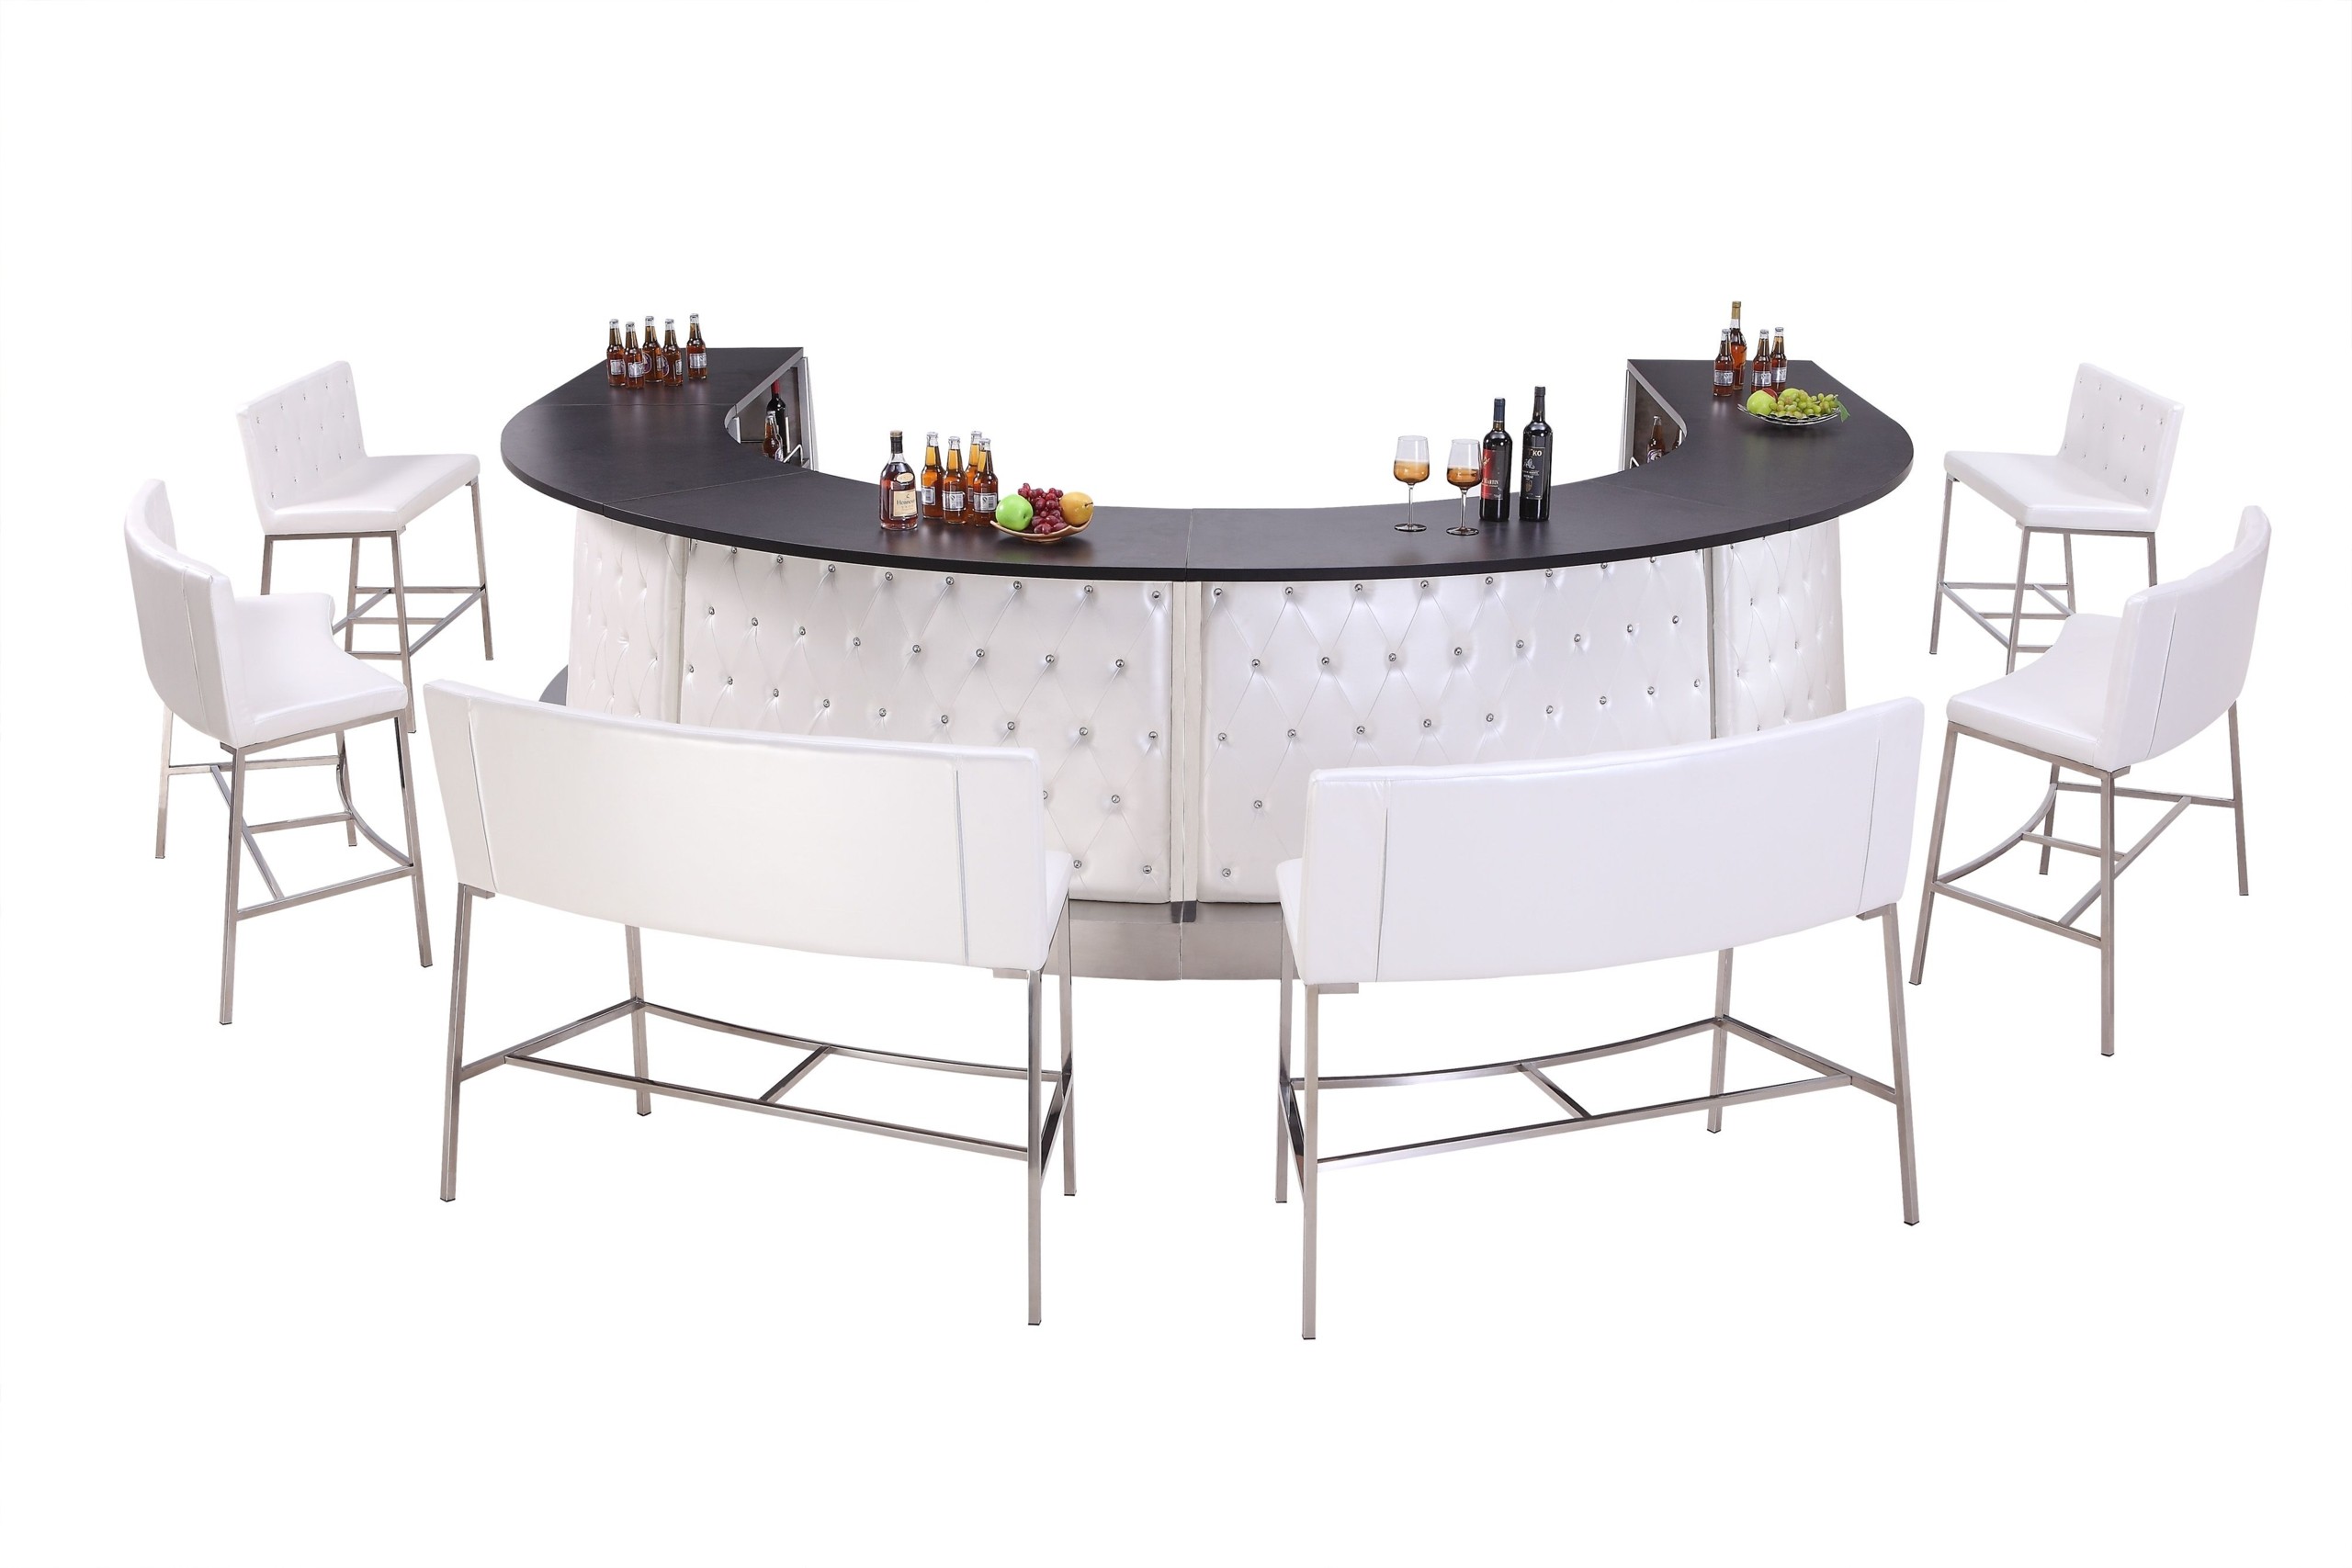 Curved bar arrangement with white leather tufted front